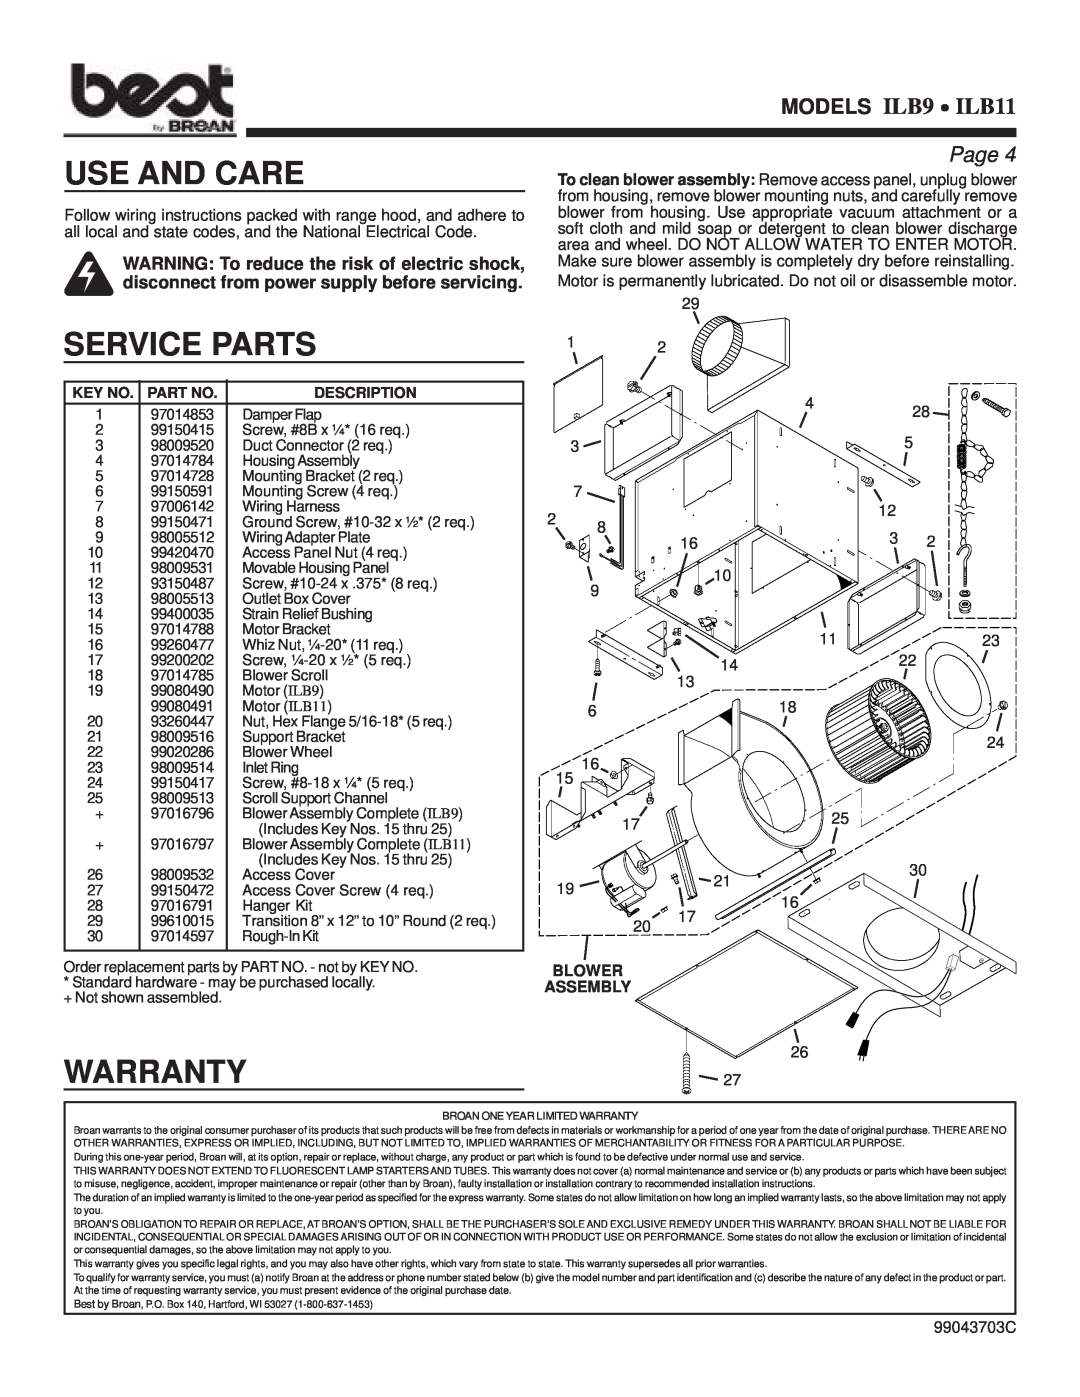 Best Use And Care, Service Parts, Warranty, Page, MODELS ILB9 ! ILB11, WARNING To reduce the risk of electric shock 